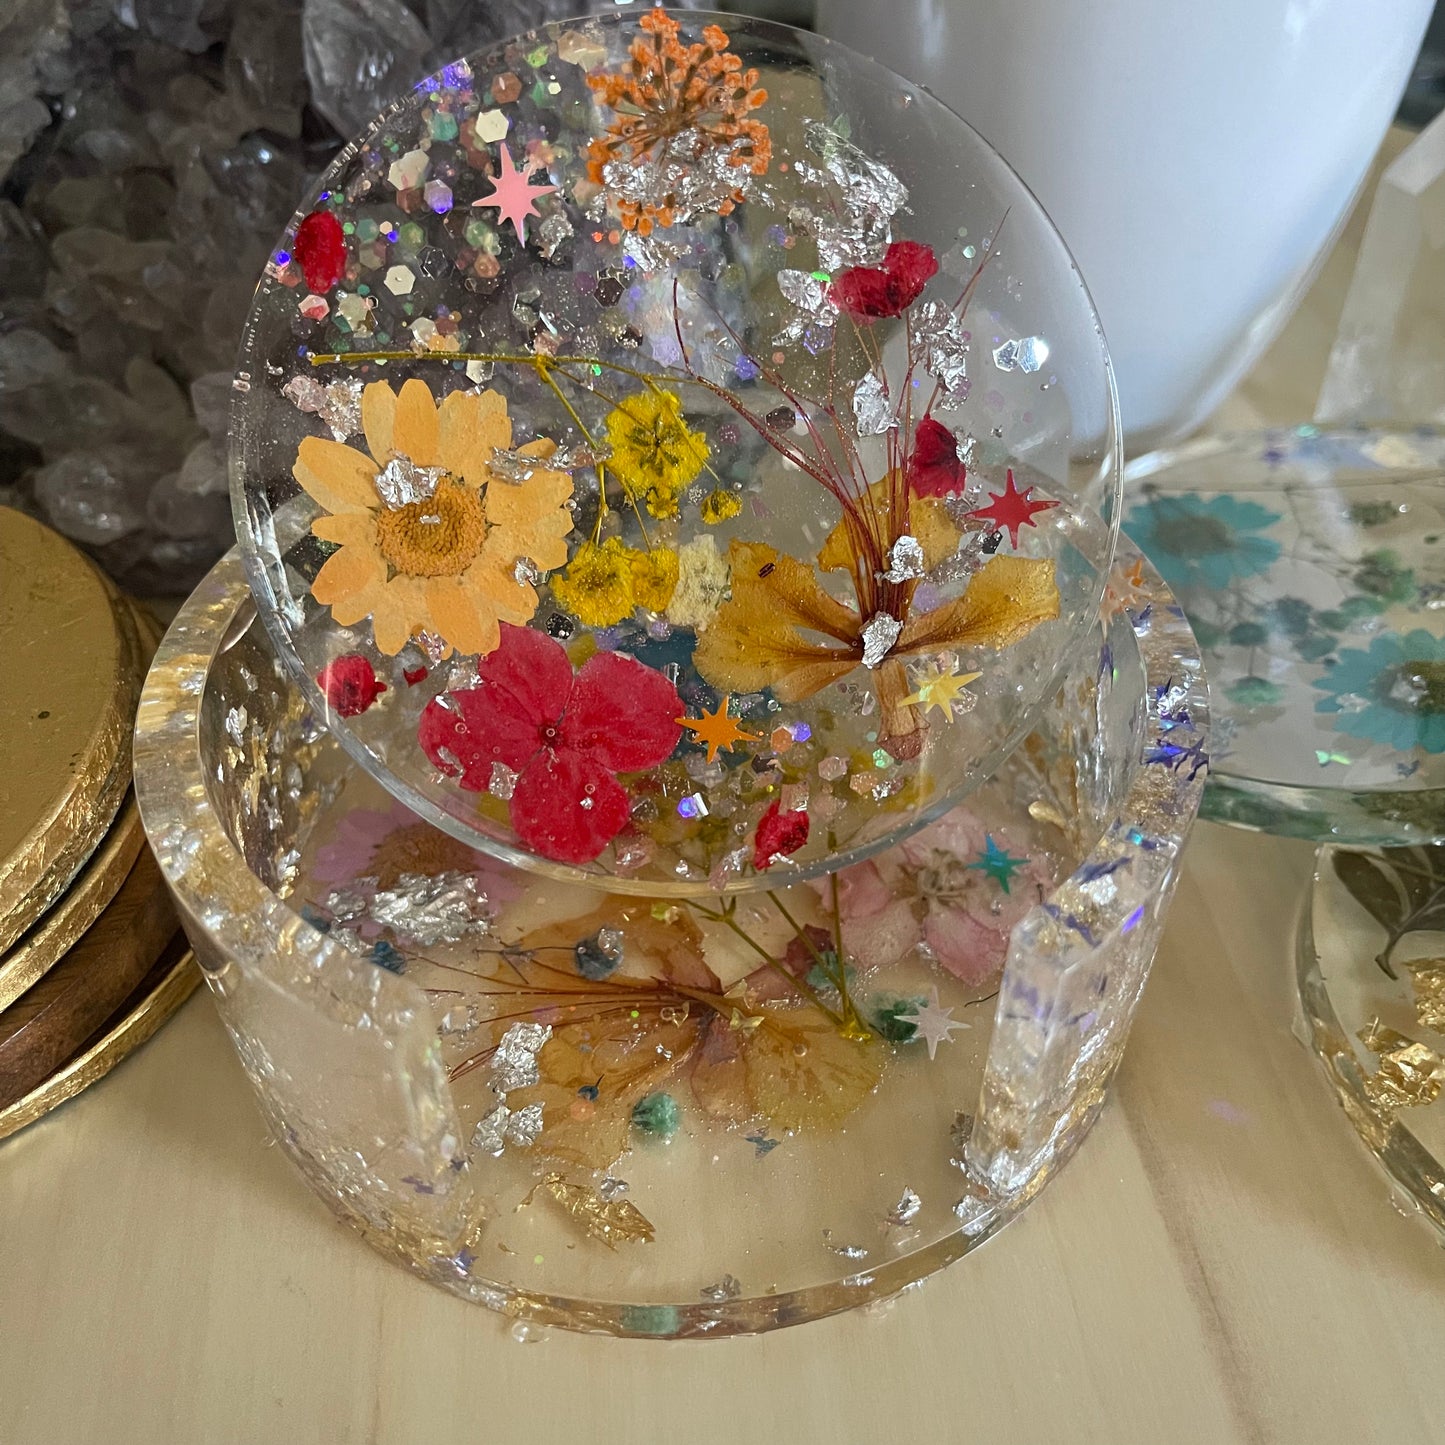 Flower Resin Coaster Class - pressed flowers- Saturday- 1/20 @ 1pm